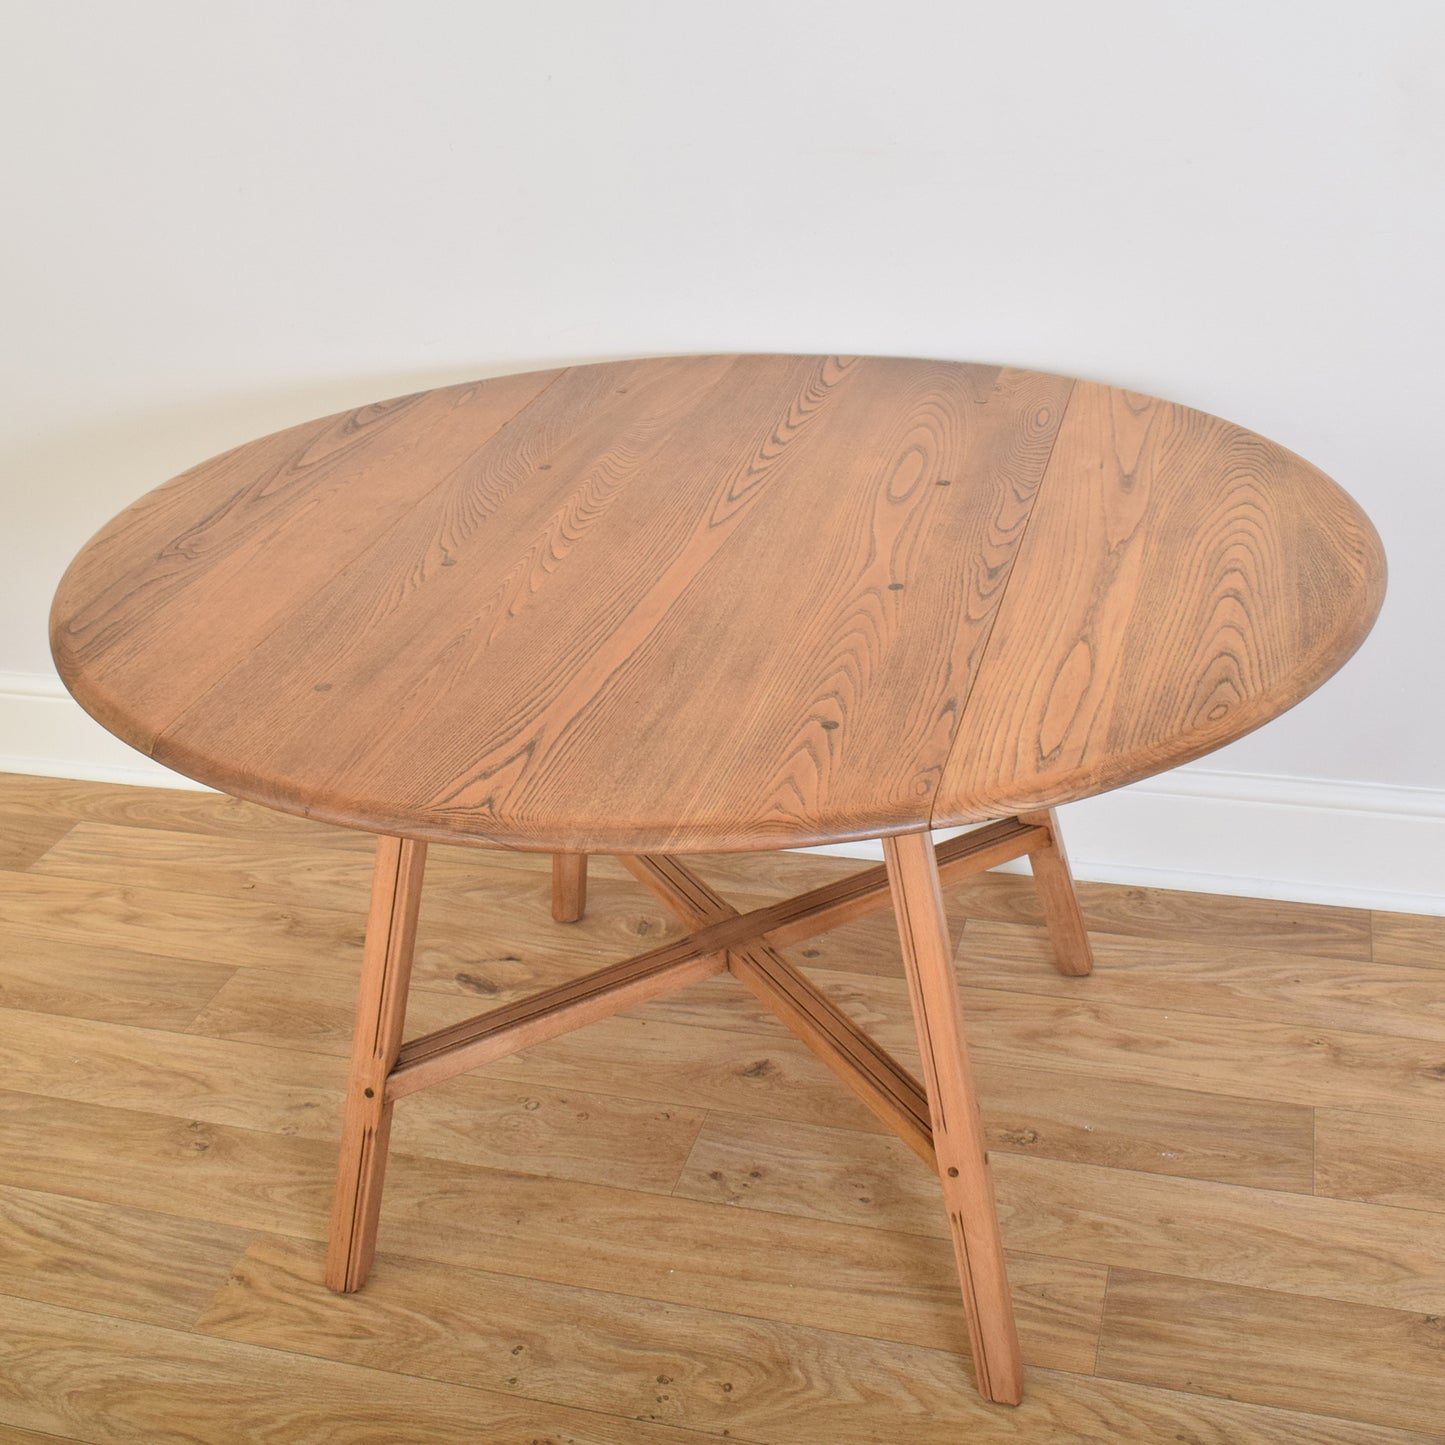 Restored Ercol Drop-Leaf Table and Four